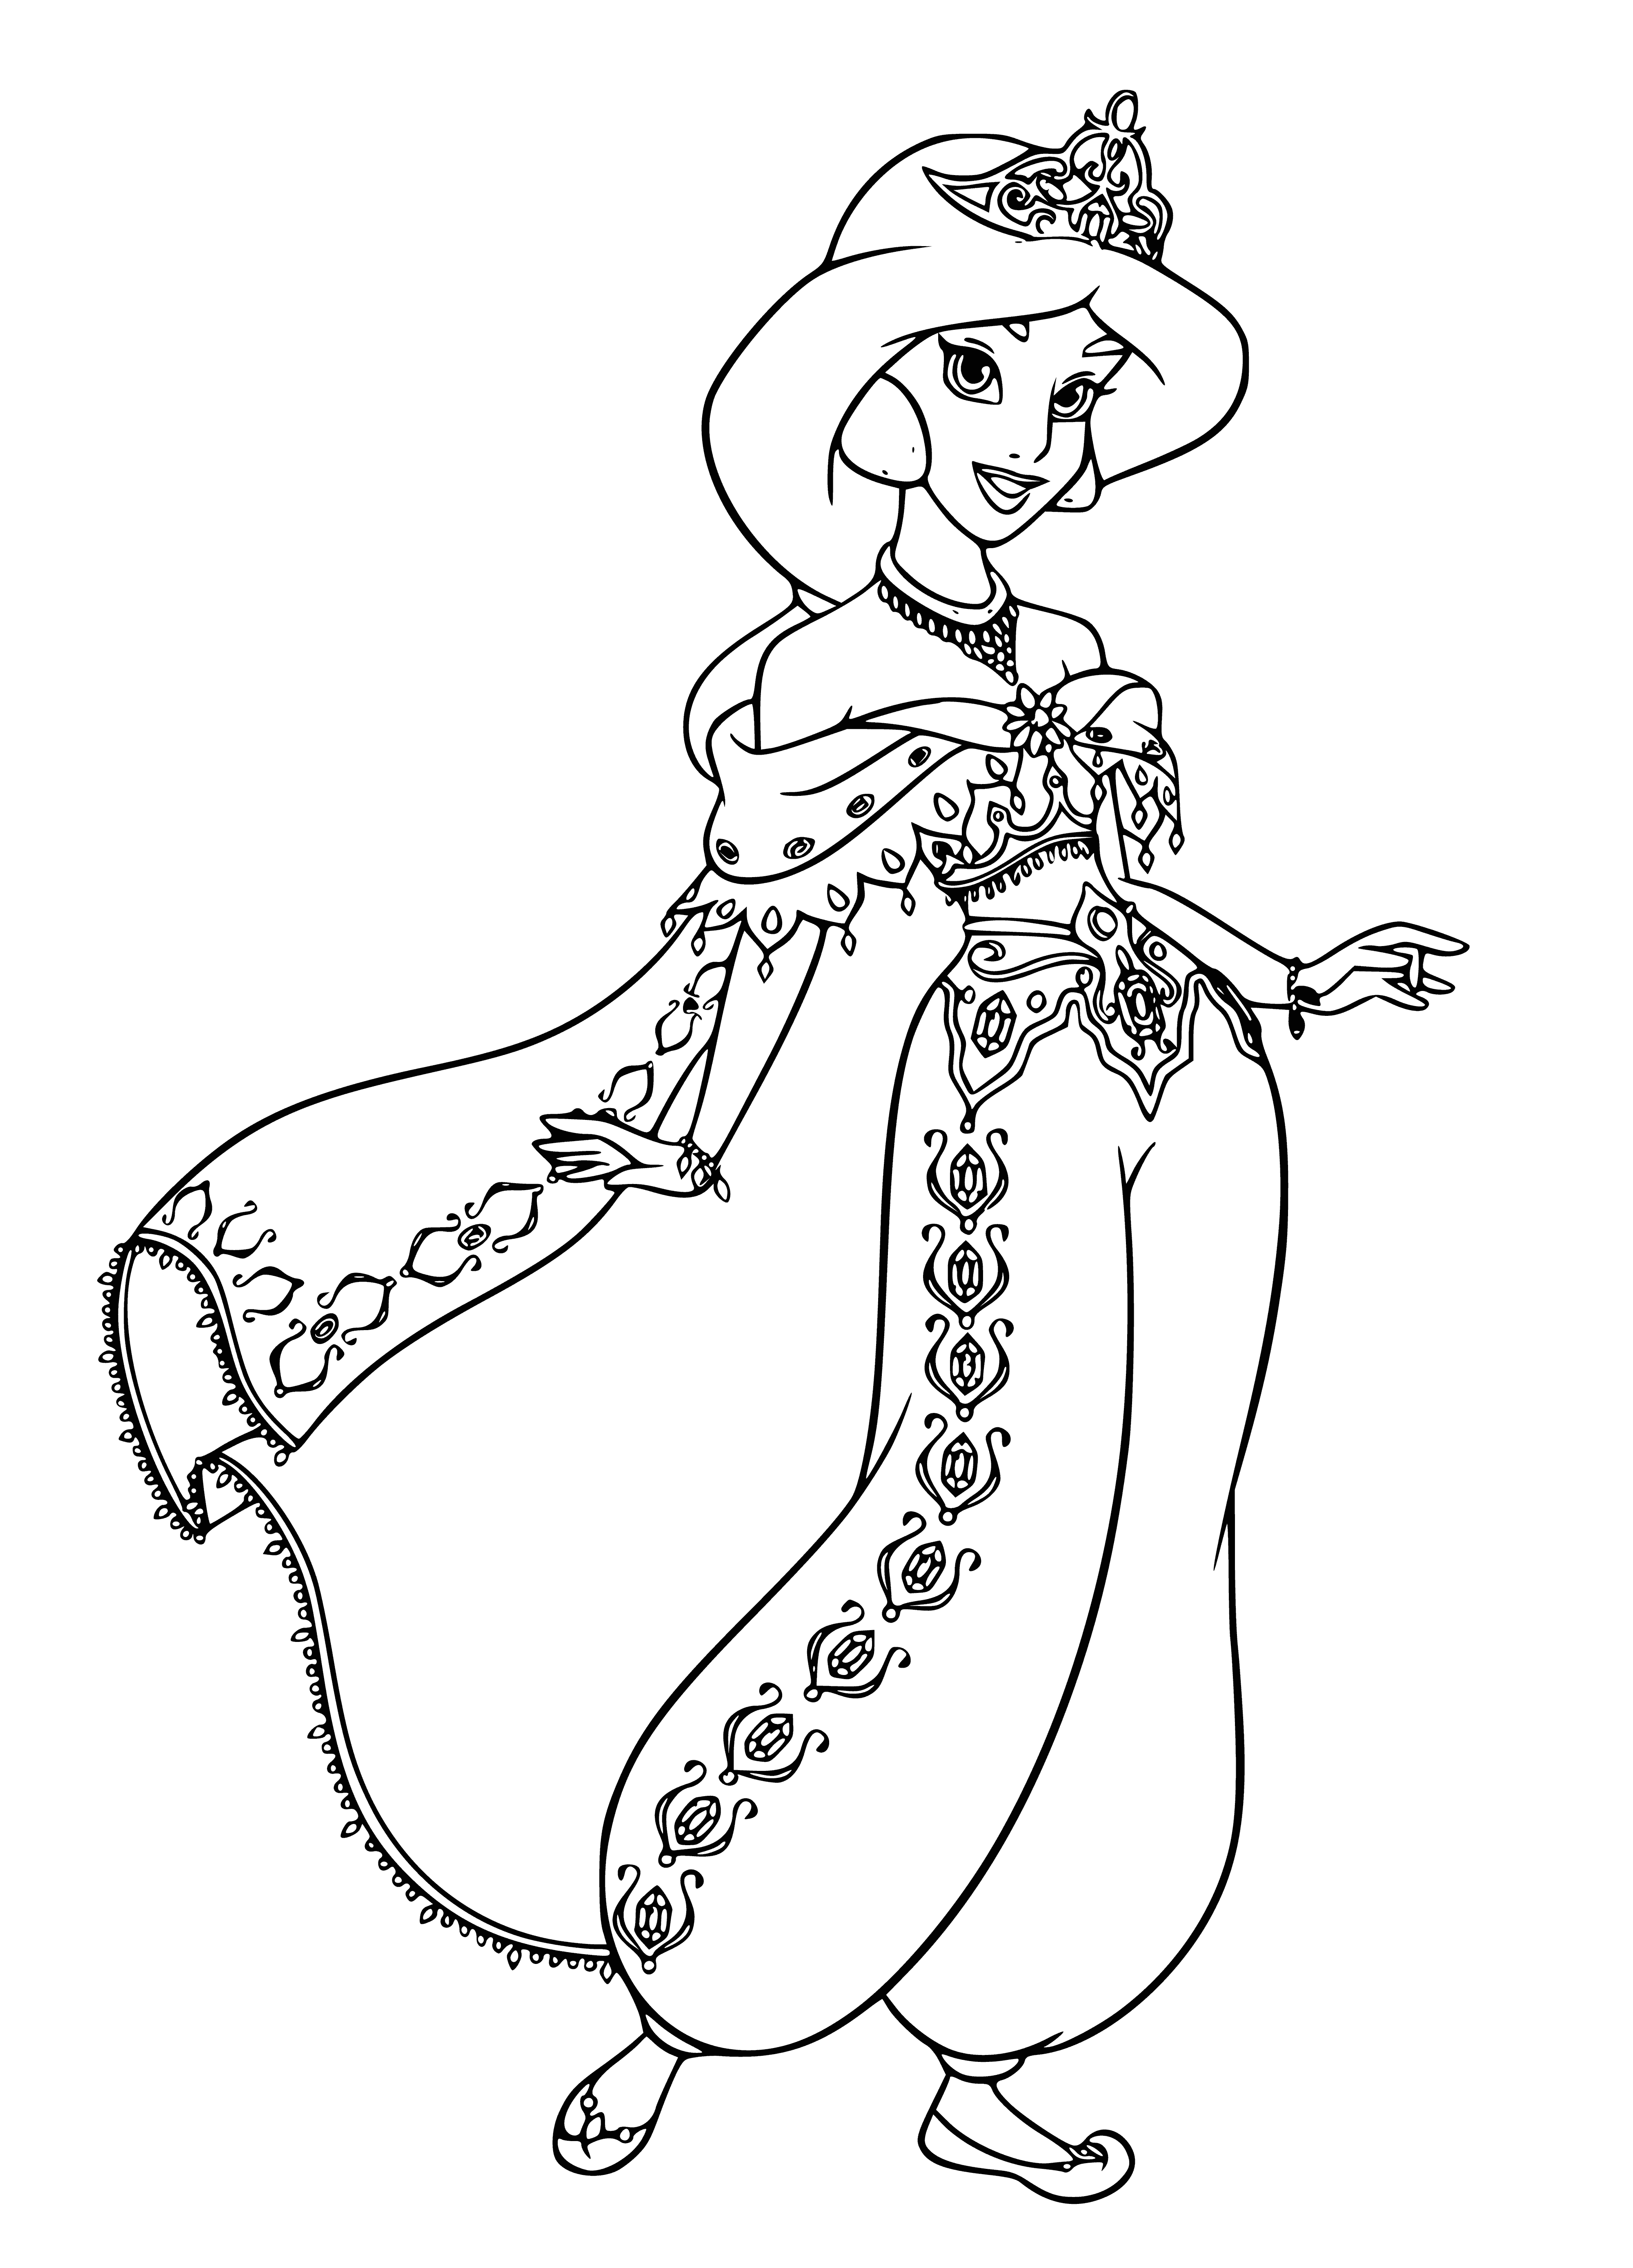 Jasmine's new outfit coloring page